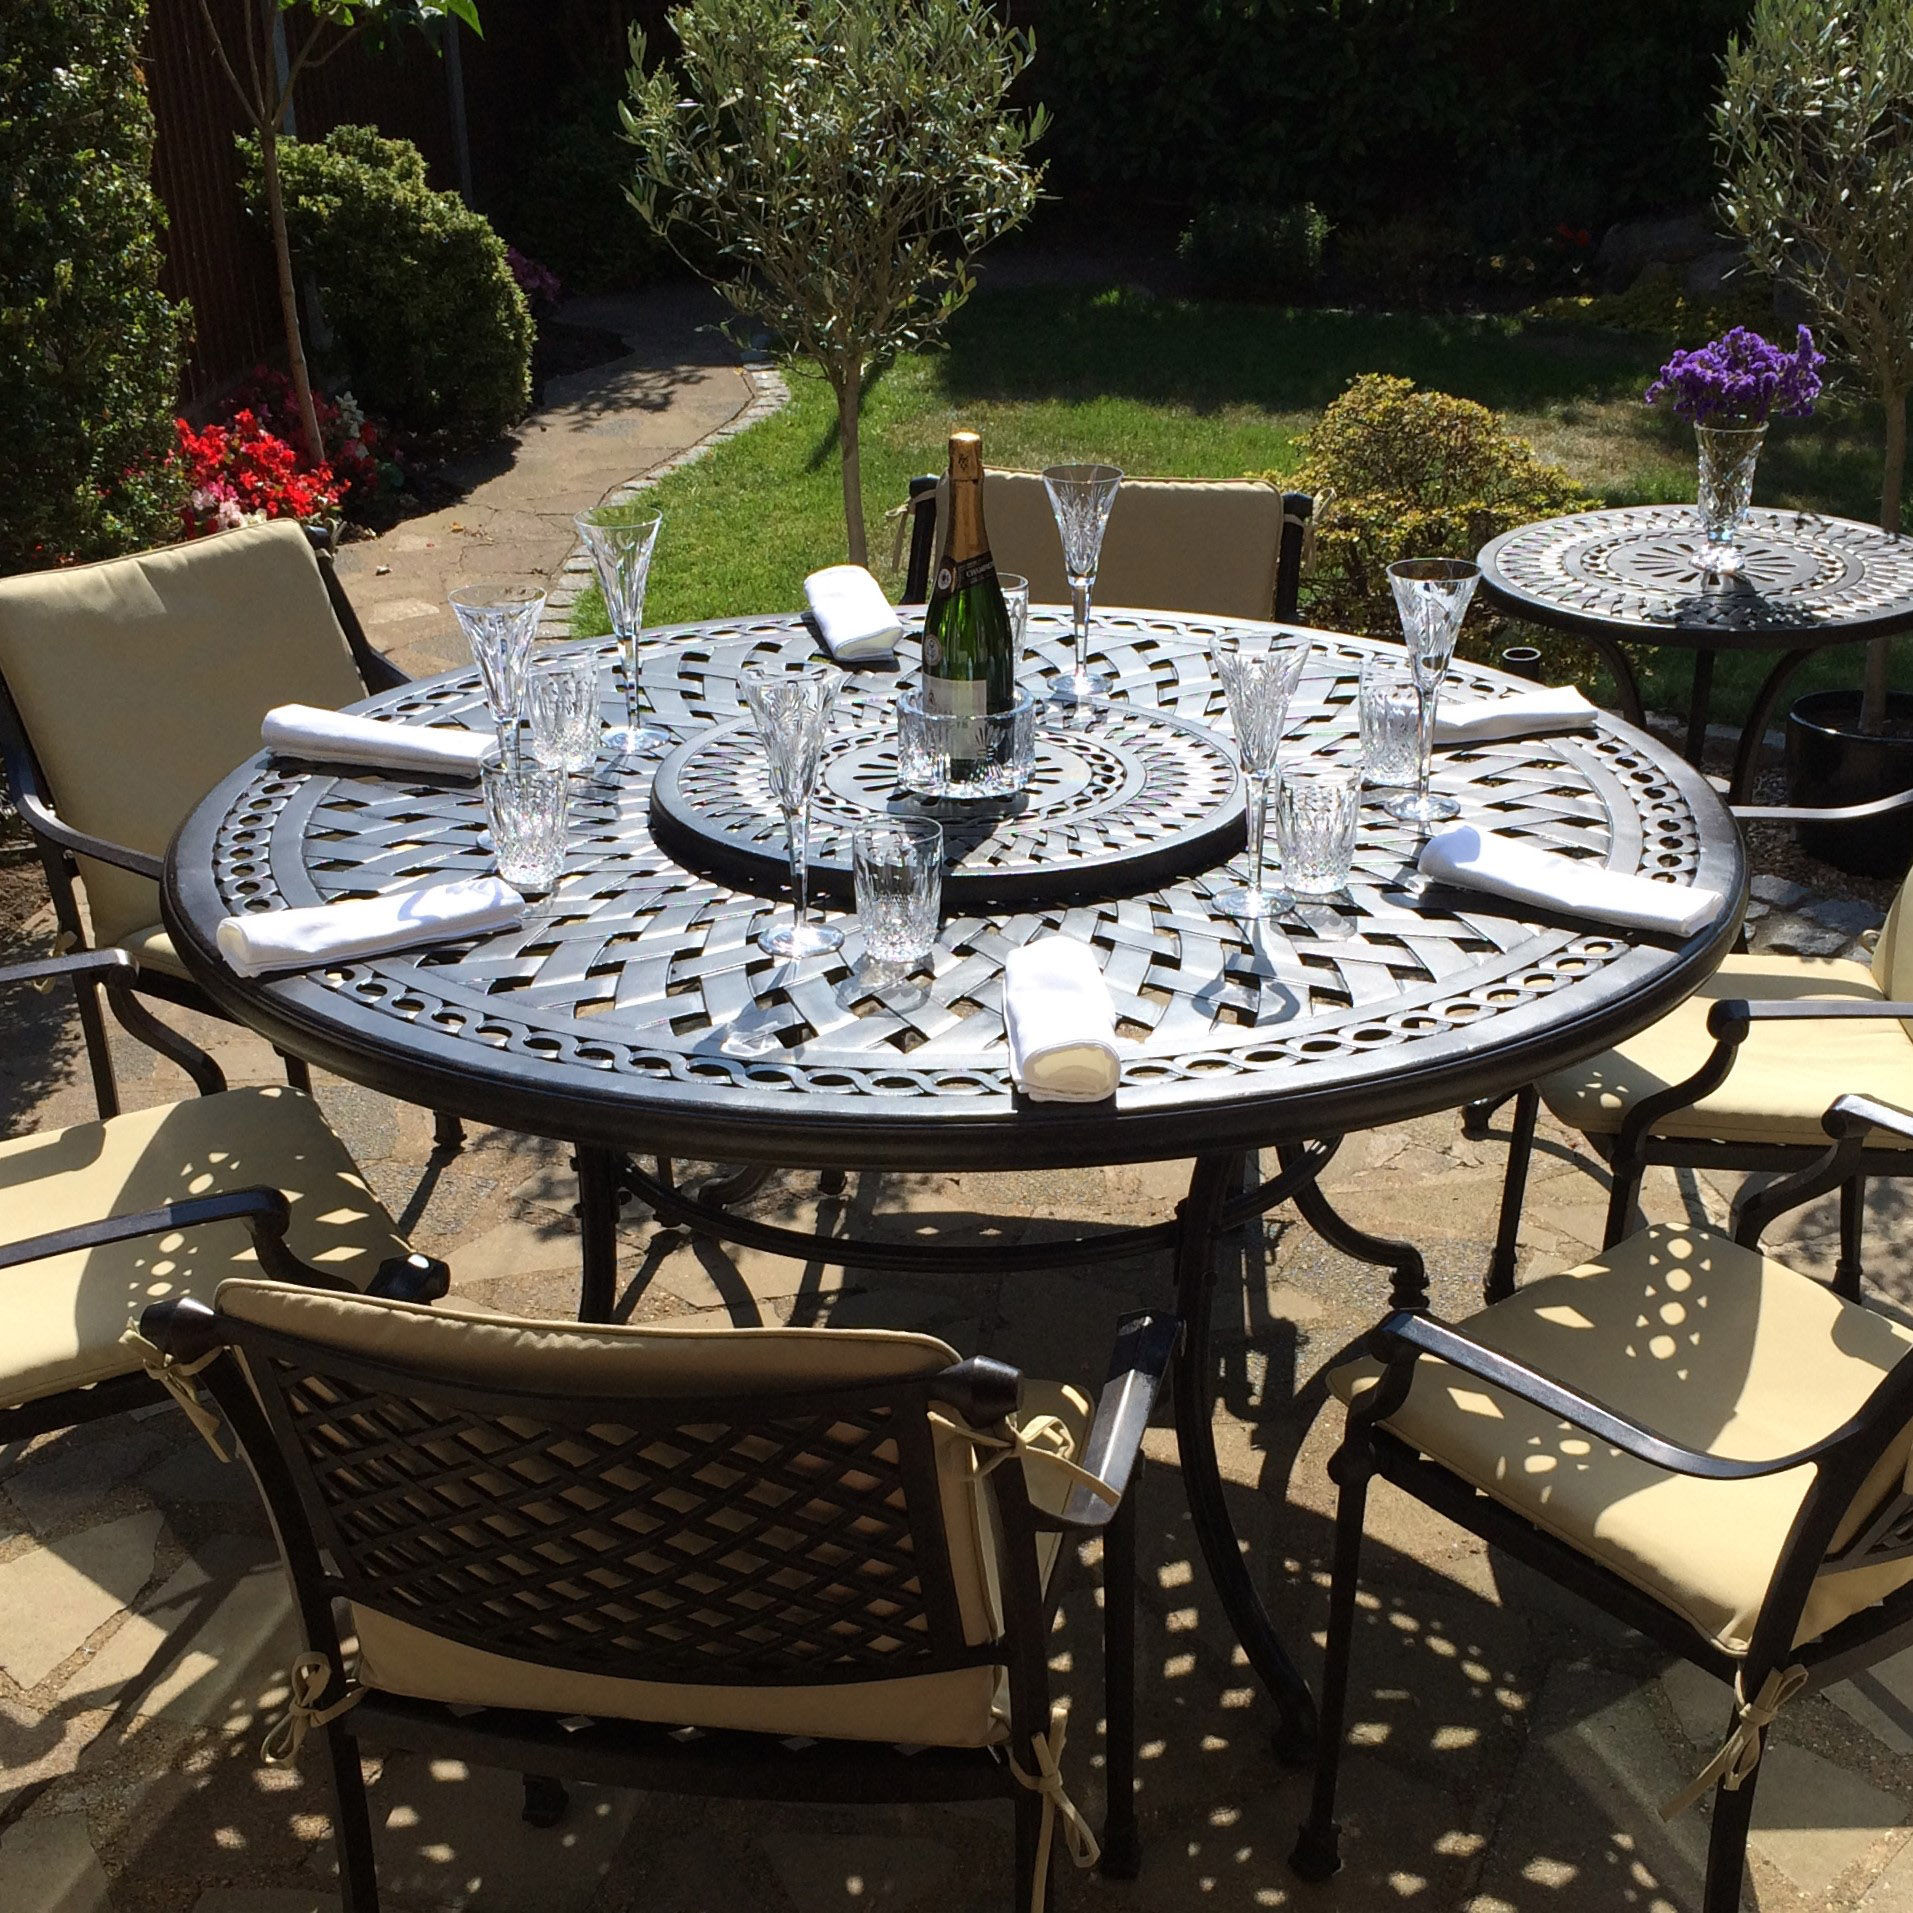 Why purchase a Frances Round Garden Dining Table from Lazy Susan?